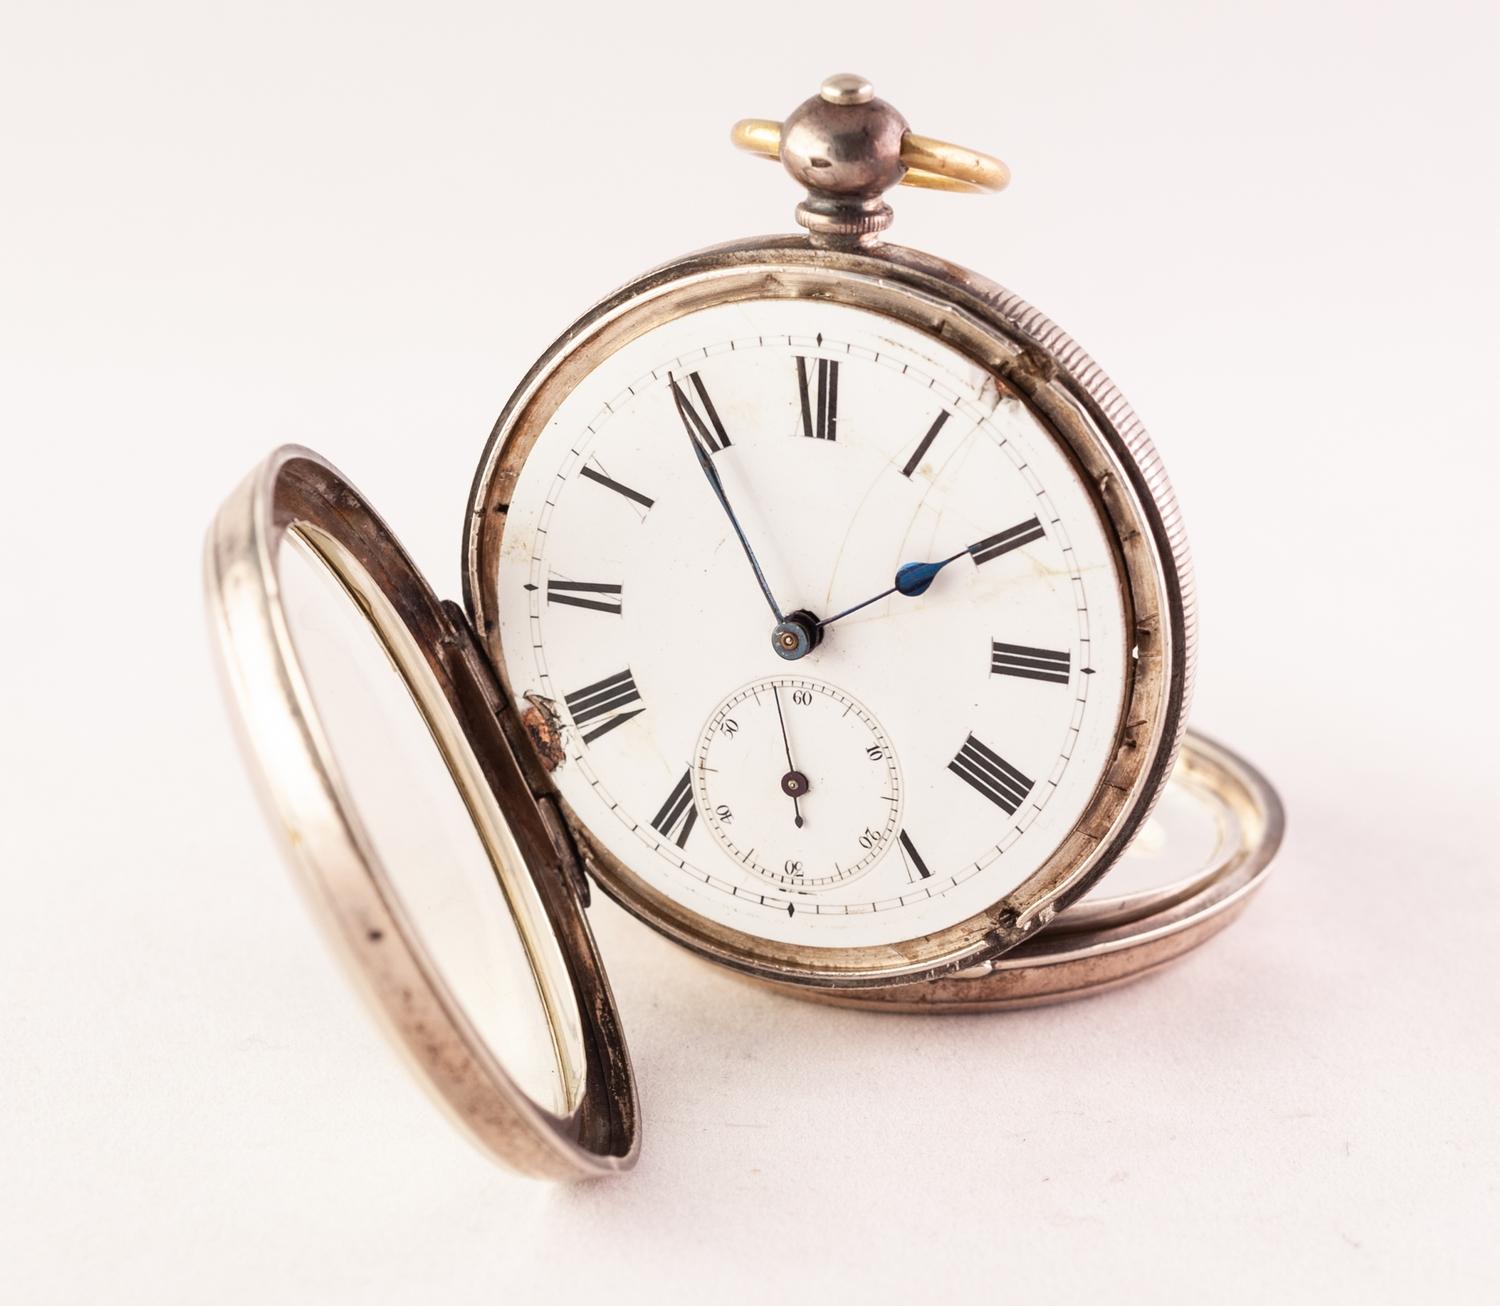 GARRARD ROLLED GOLD OPEN FACED POCKET WATCH with Swiss 15 jewels keyless movement, white Arabic dial